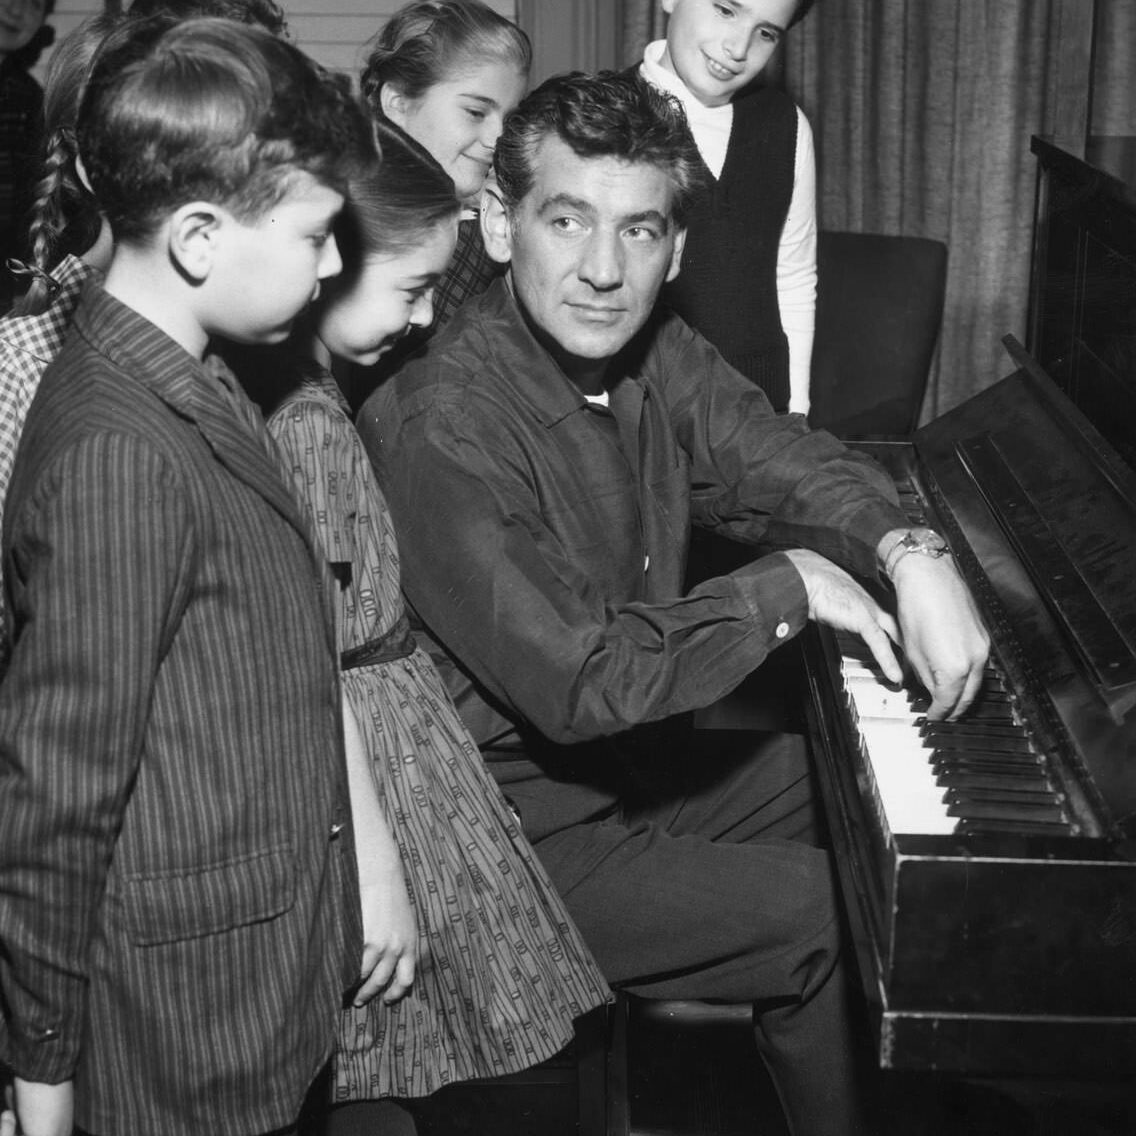 1958:  American composer Leonard Bernstein (1918 - 1990) plays piano for a group of children, New York City.  (Photo by CBS Photo Archive/Getty Images)